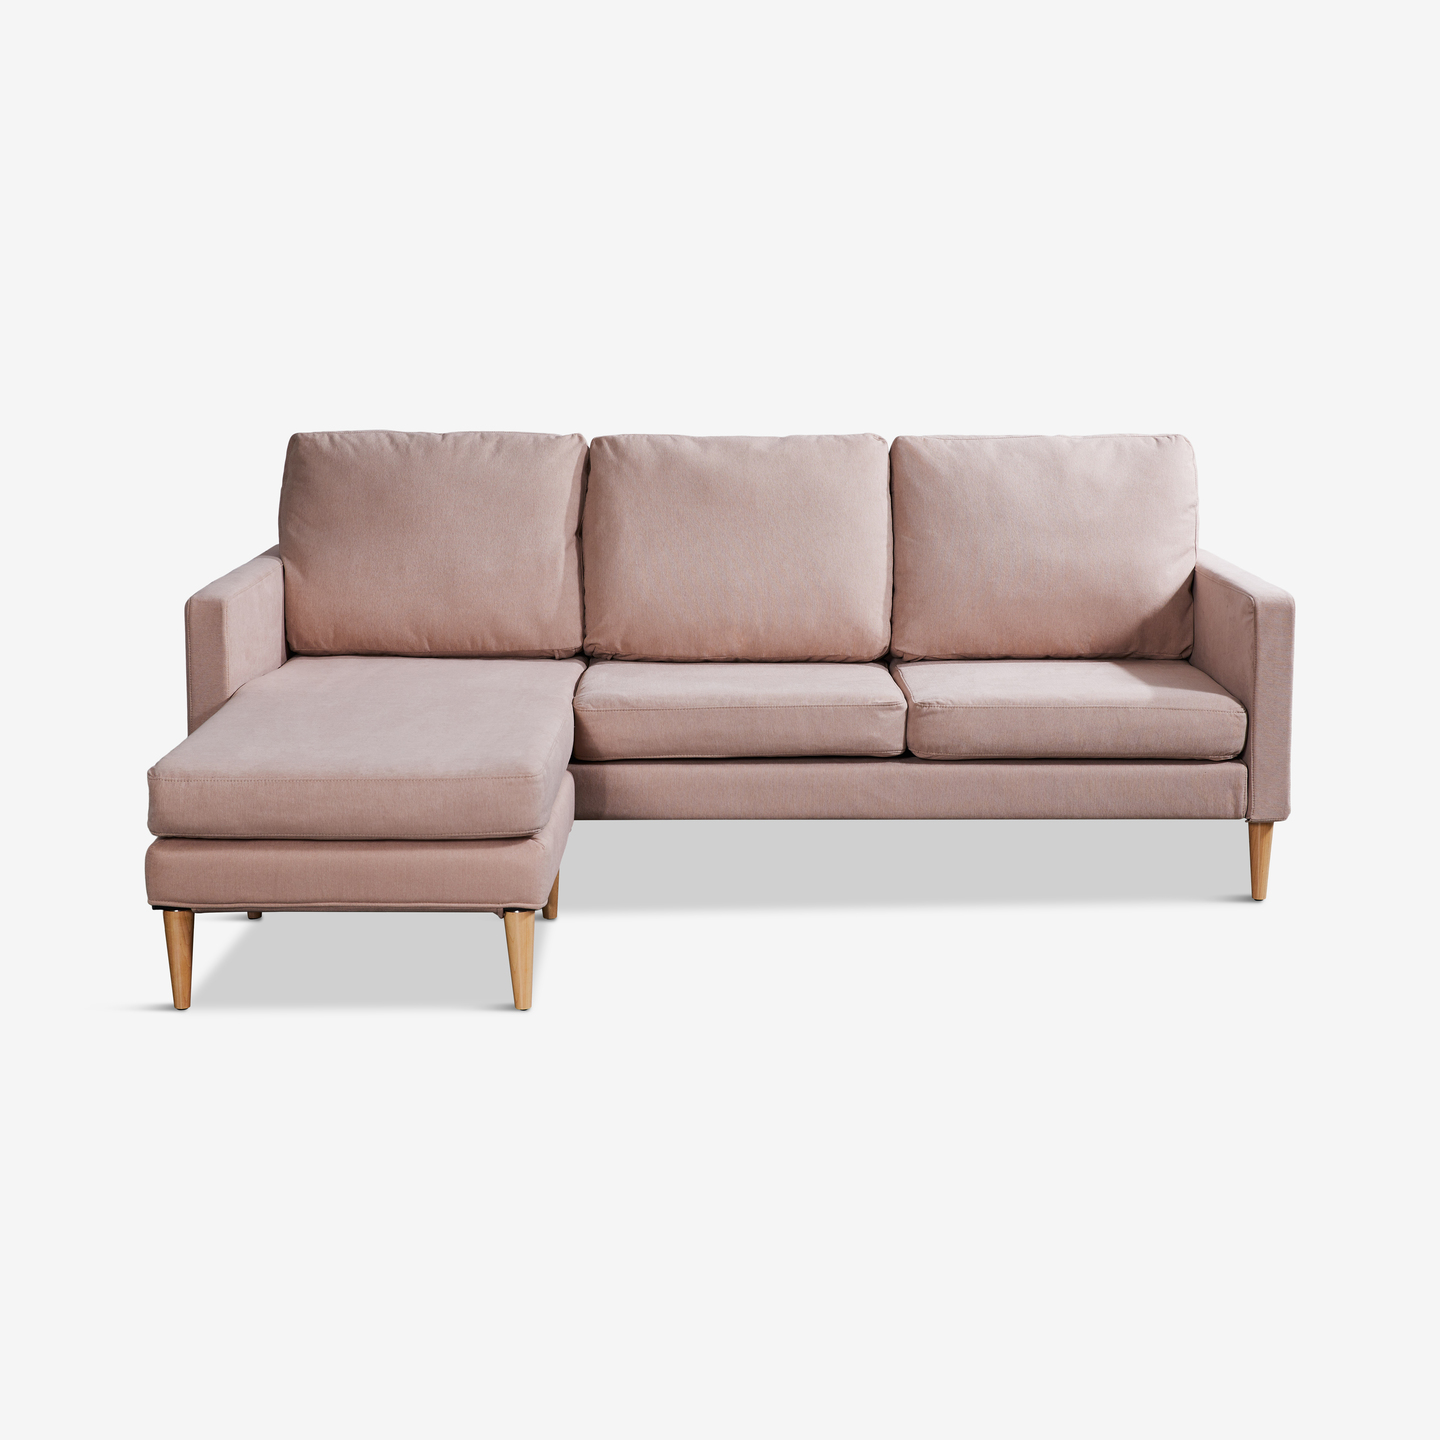 479_Campaign-Sofa-Sectional-Dusty-Rose_Flat-Front-ottoman-left_california-chic_Living-Room-6 2020